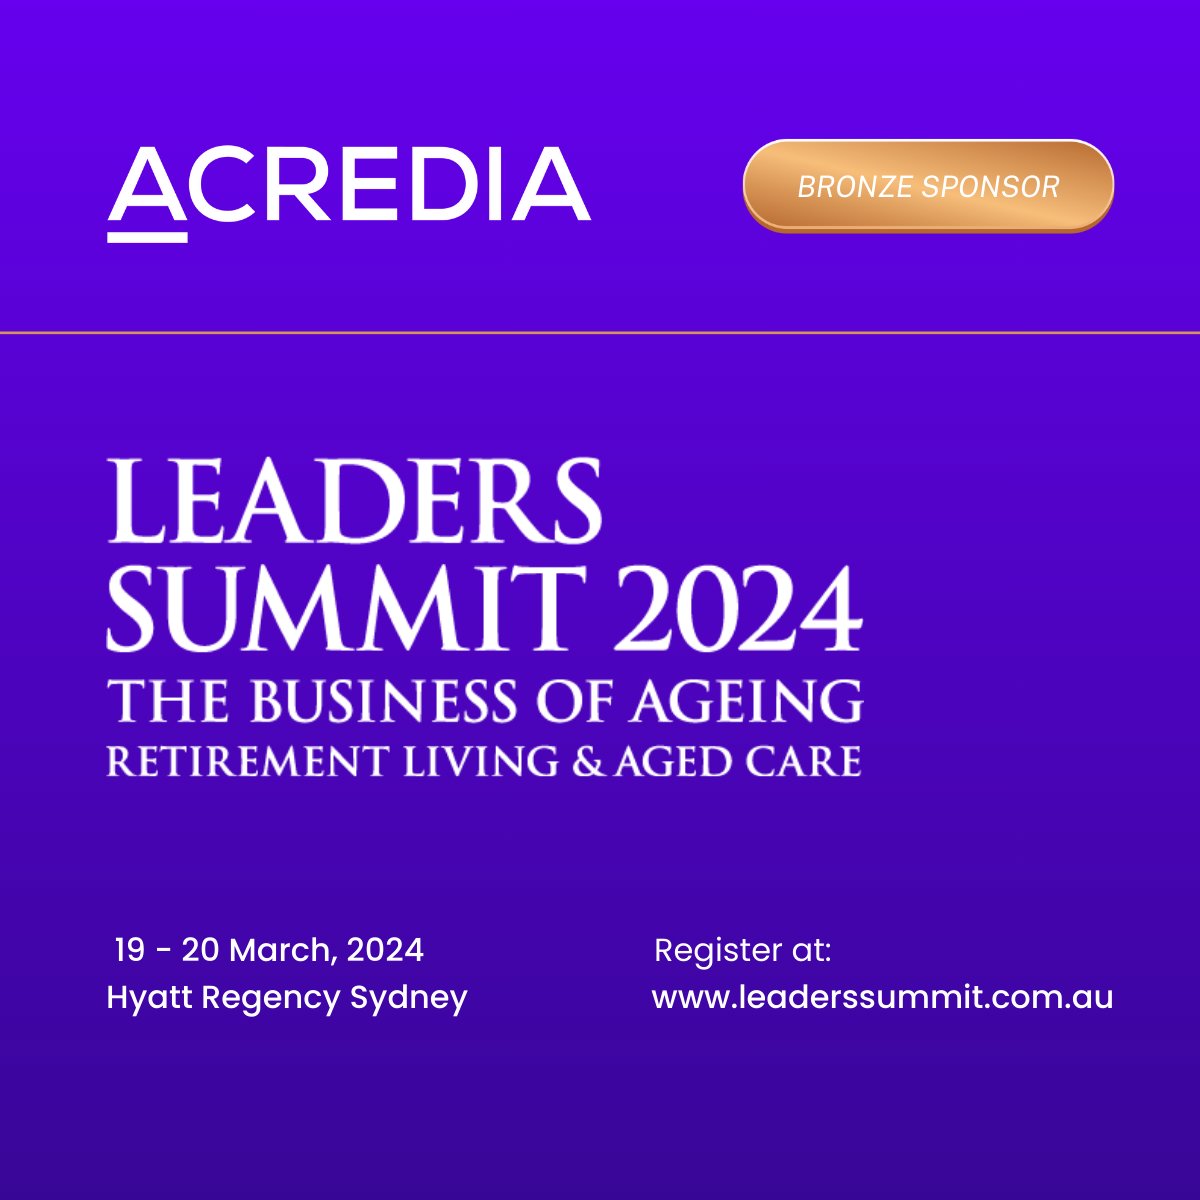 Pleased to be a part of the Leaders Summit - a two day strategy summit which will bring together thought leaders across aged care, retirement living and home care. cstu.io/a6127c

#agedcare #agedcareaustralia #retirementliving #leaderssummit2024  @TheDCMGroup